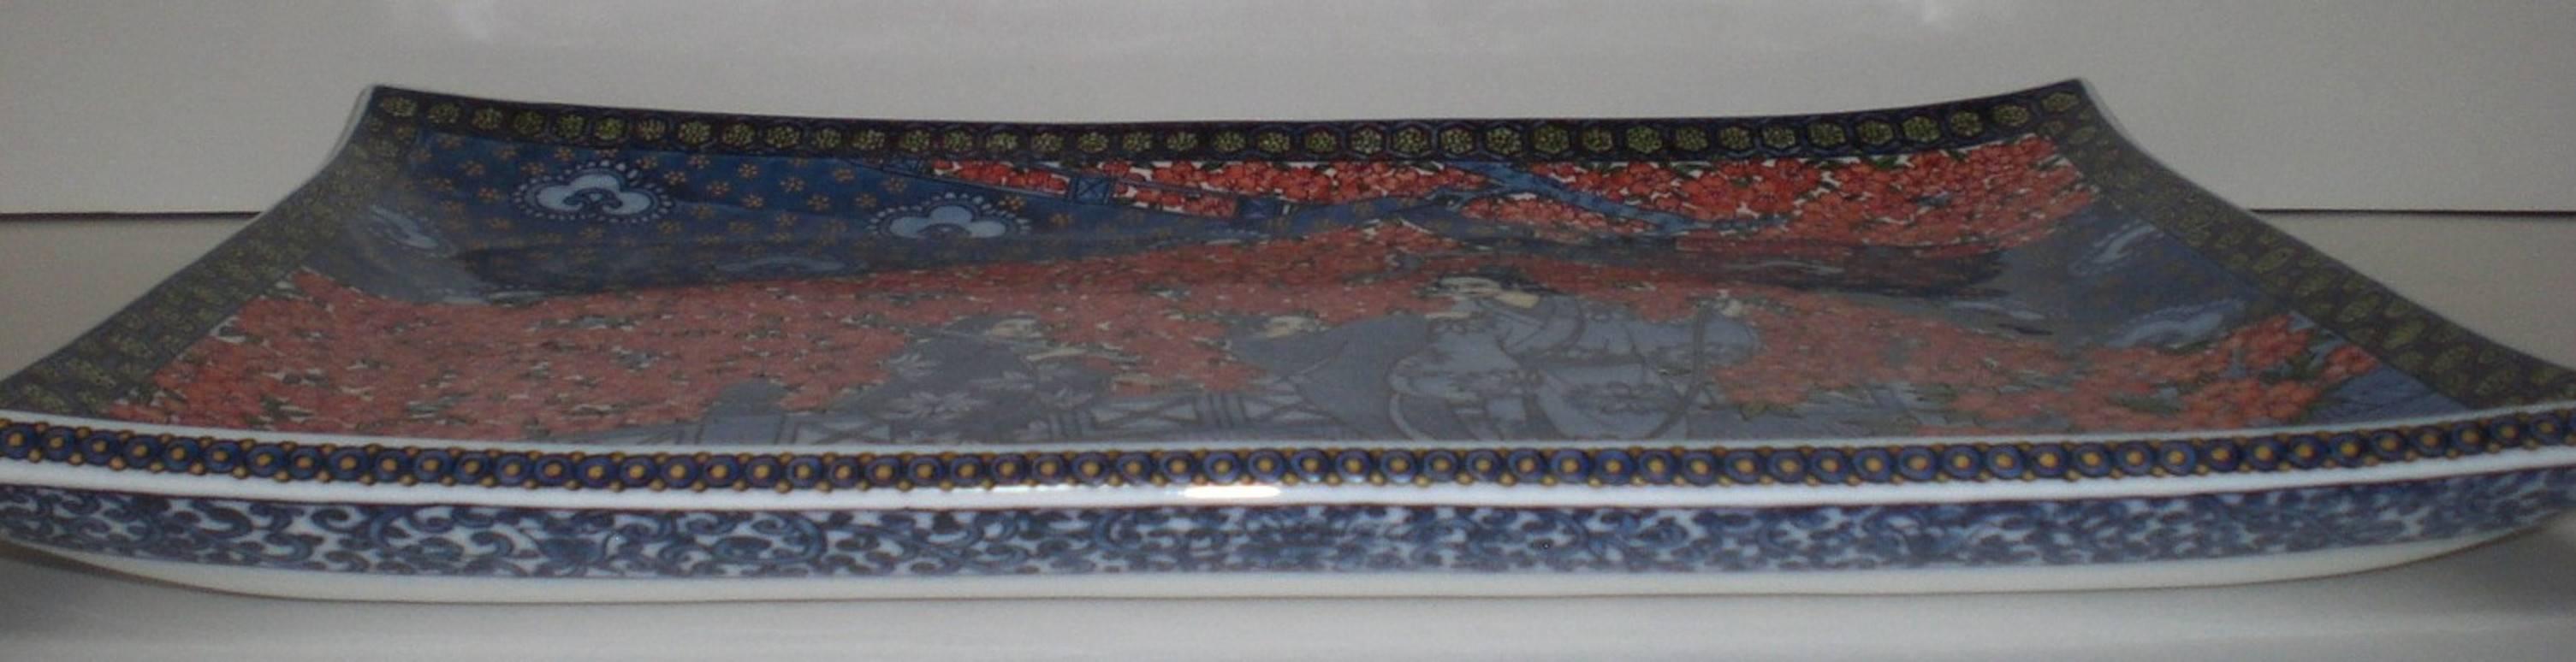 Contemporary Japanese Imari Porcelain Charger by Master Artist (1931-2009), in Red and Blue